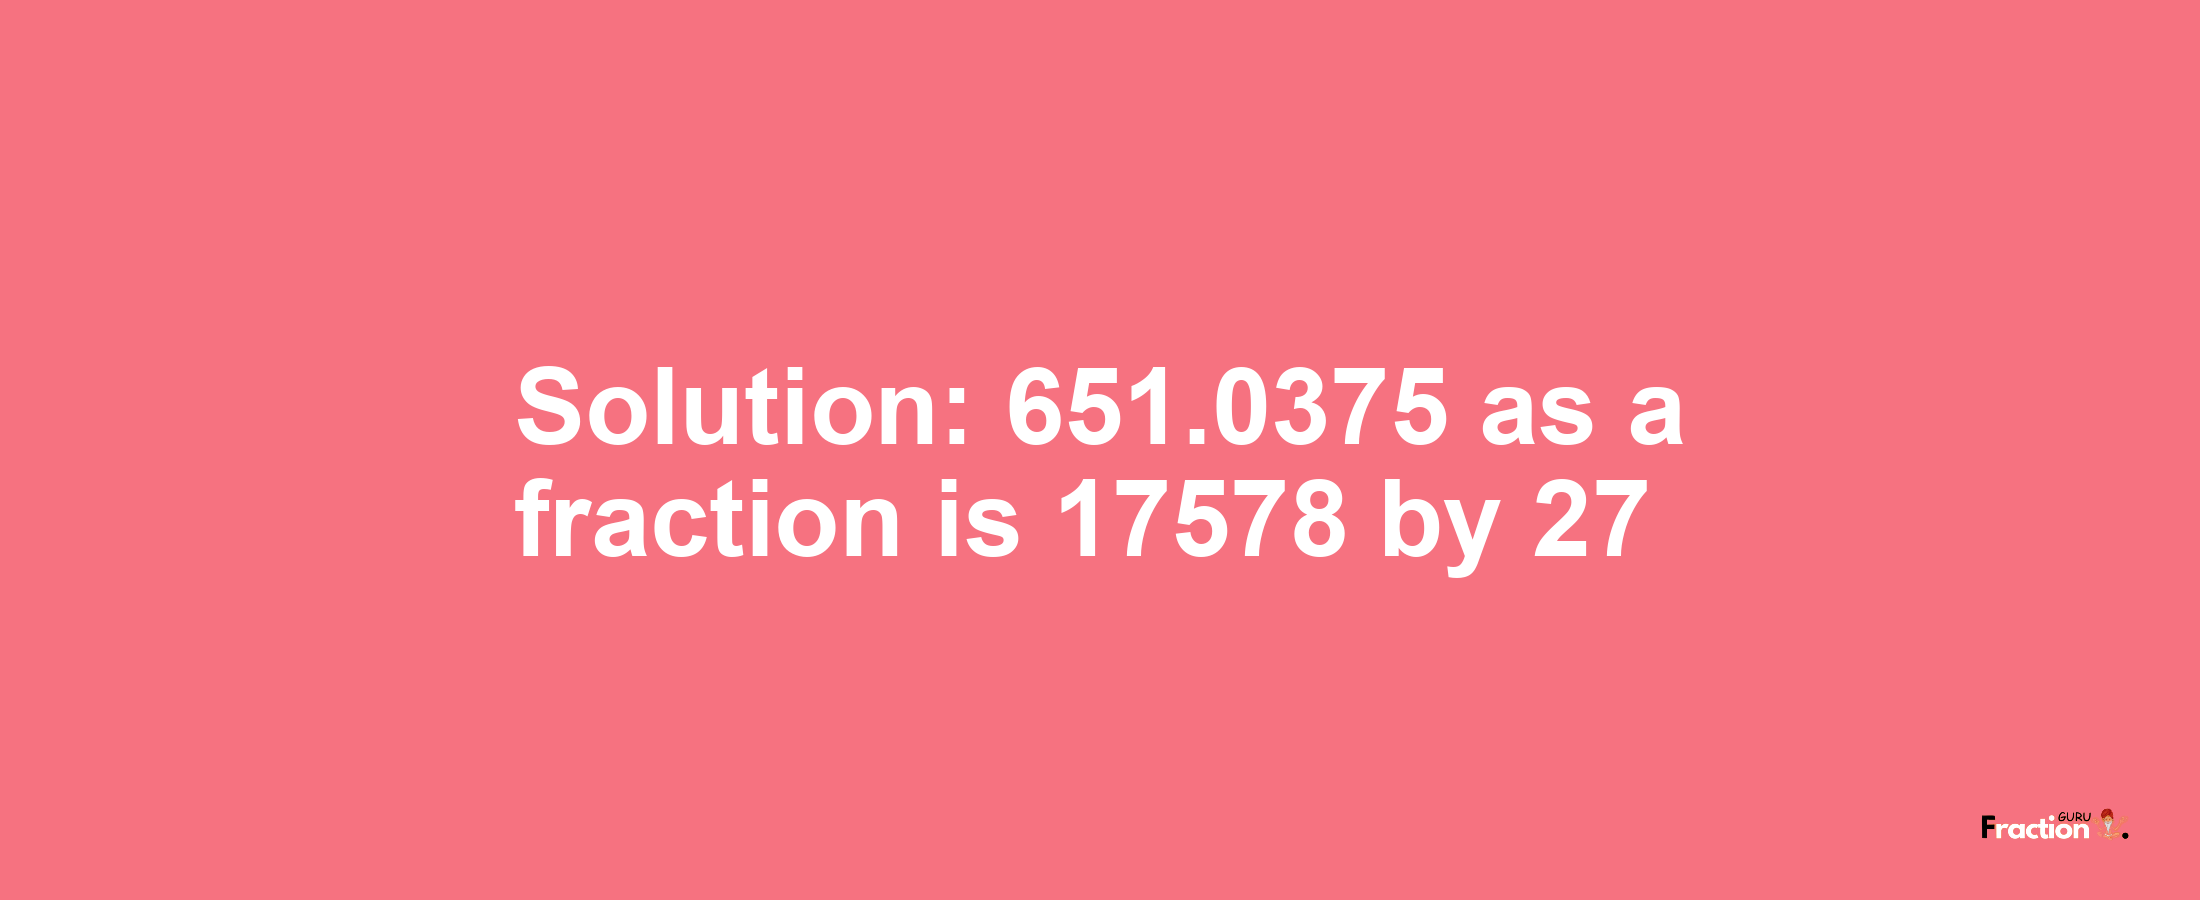 Solution:651.0375 as a fraction is 17578/27